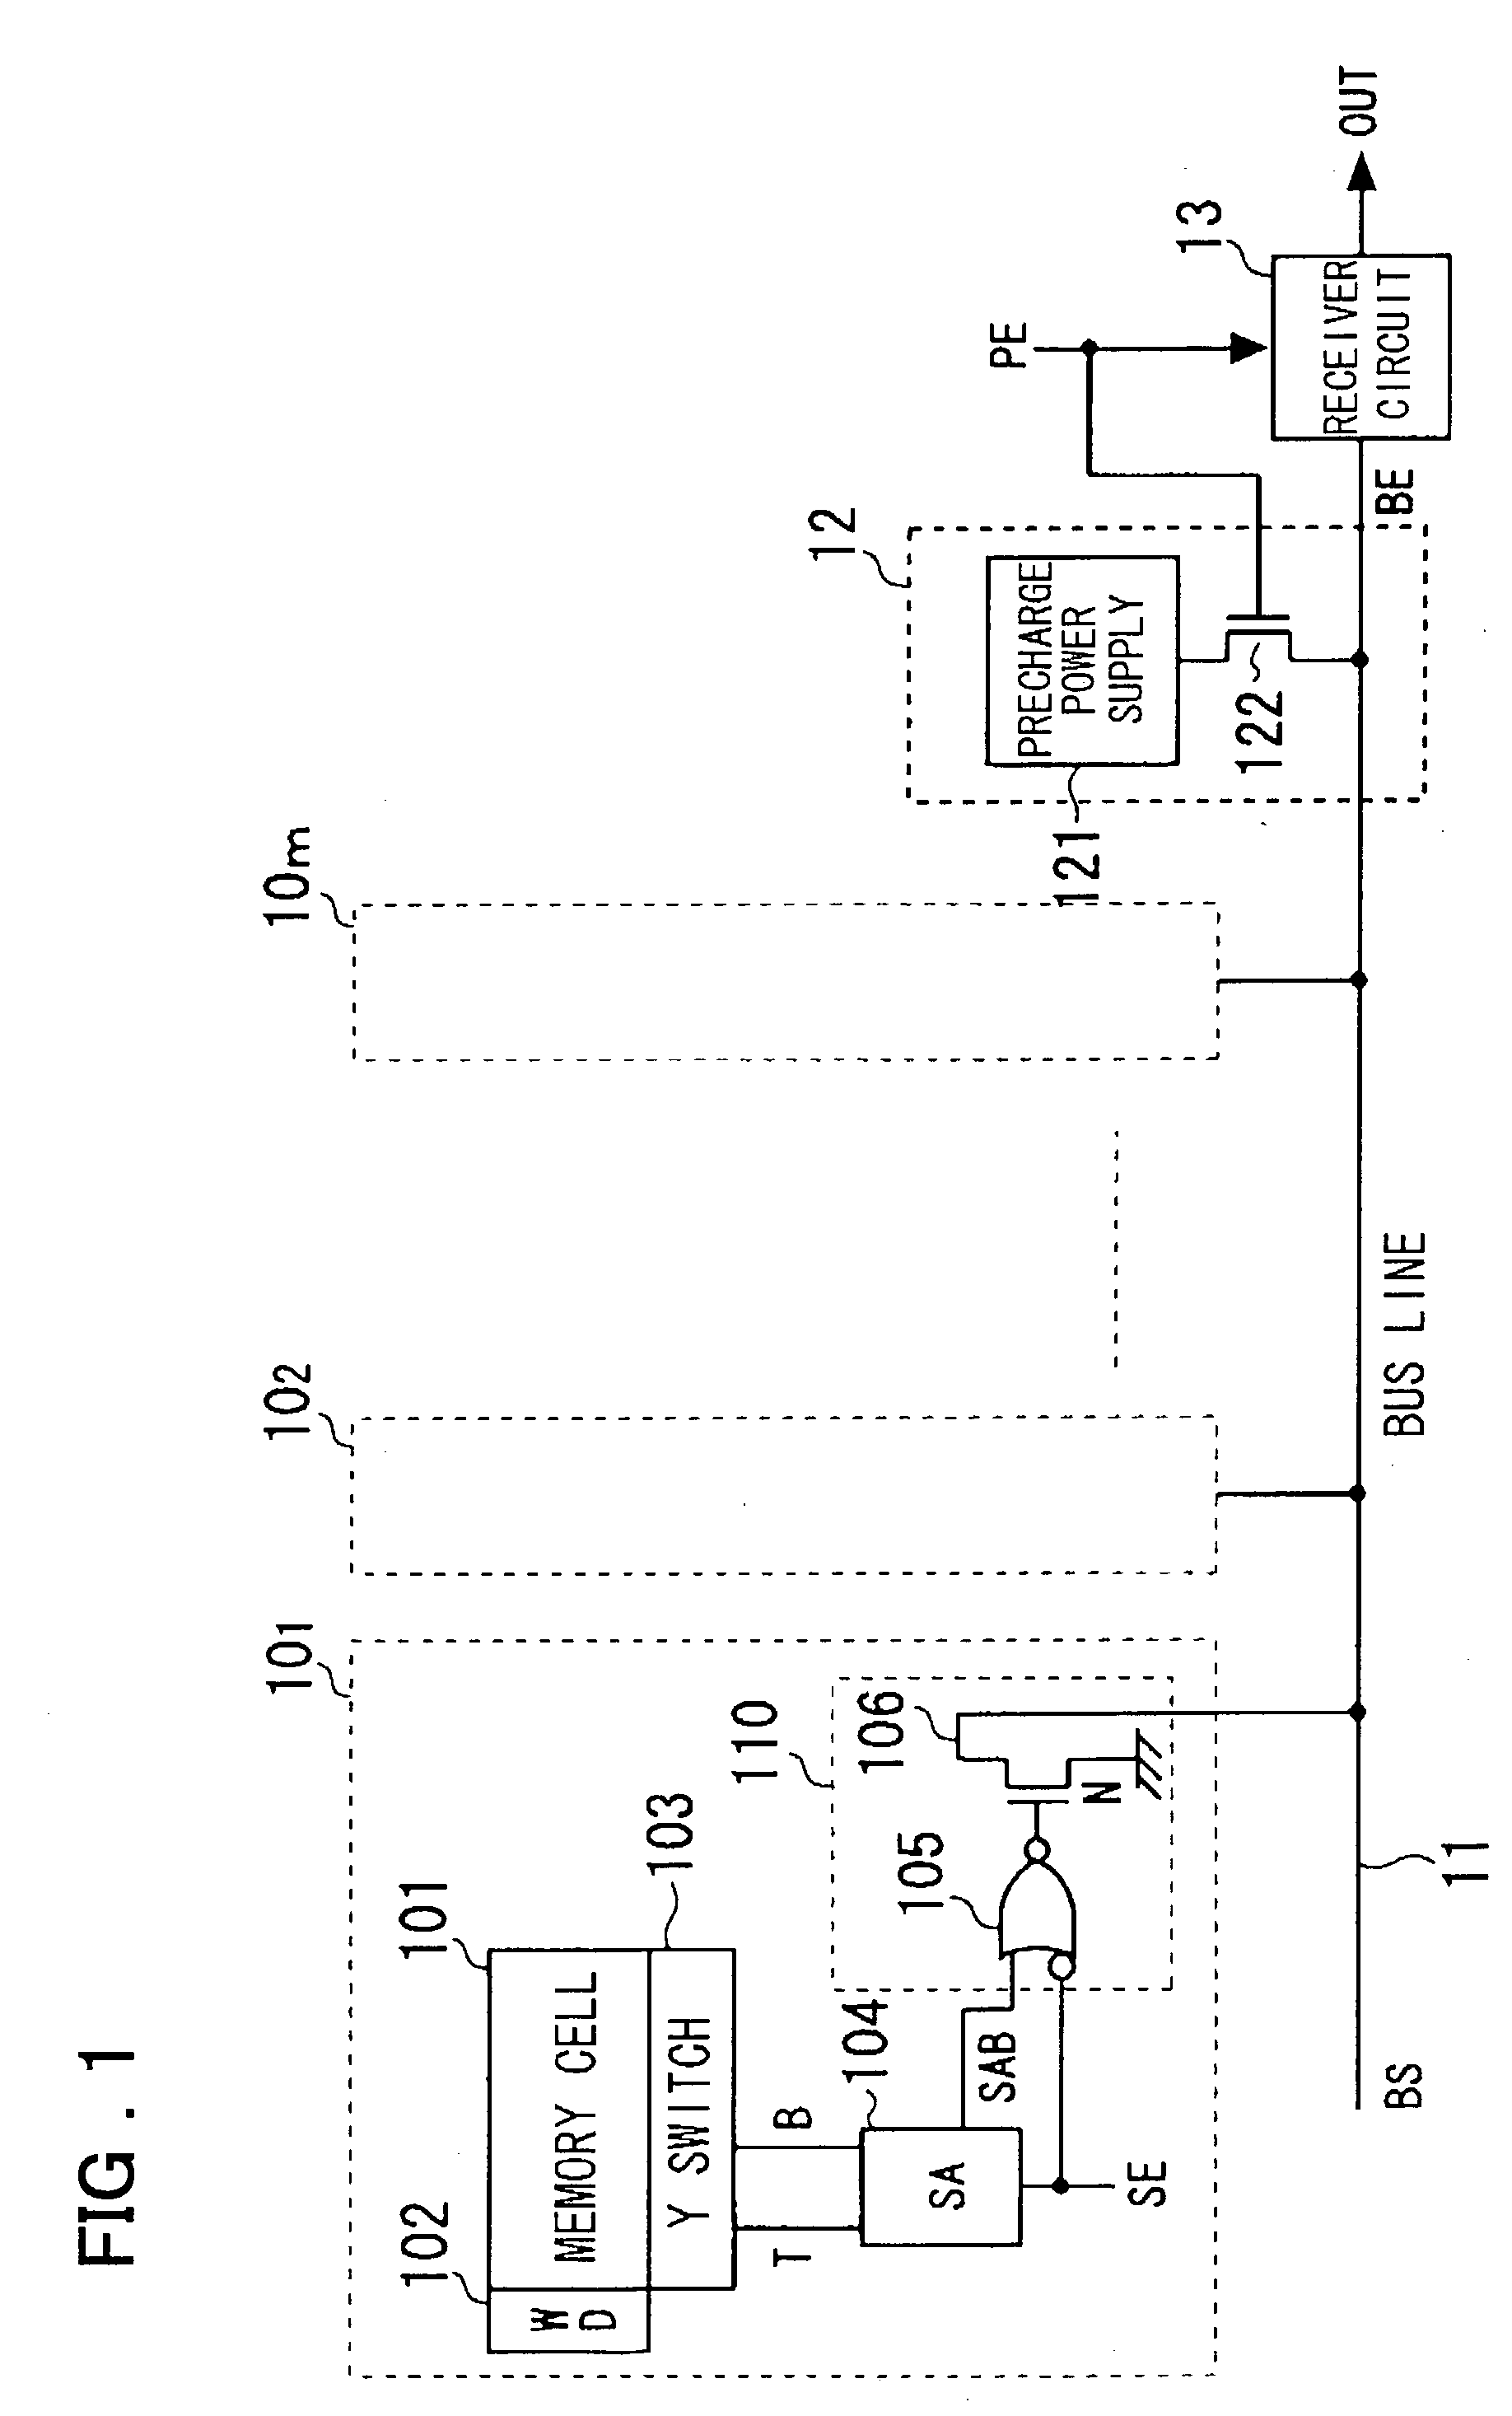 Bus interface circuit and receiver circuit